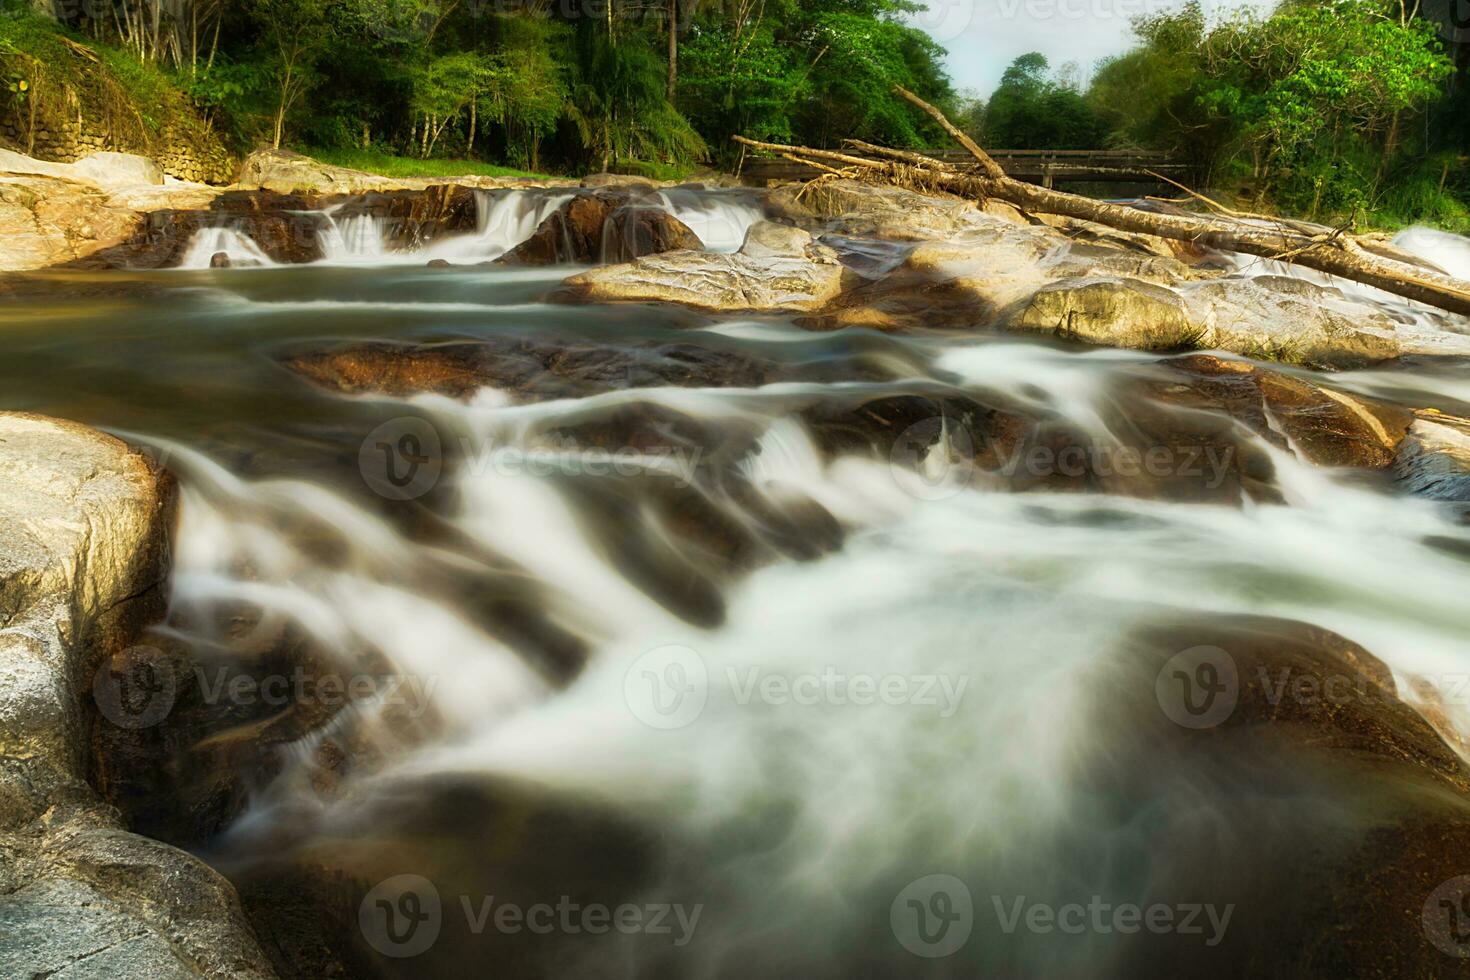 Small waterfall and stone with water motion. photo